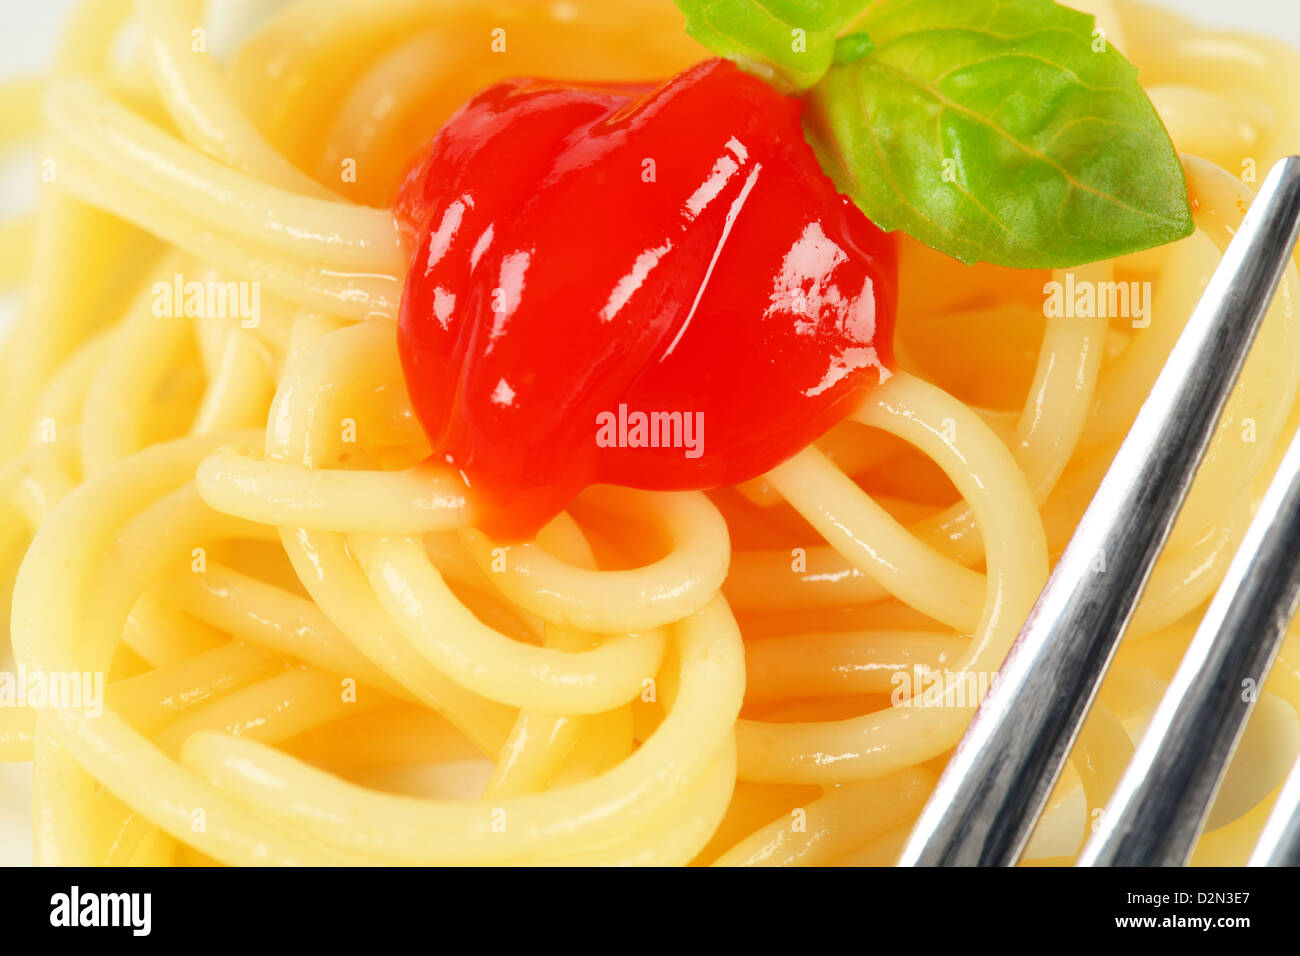 Spaghetti with ketchup Stock Photo